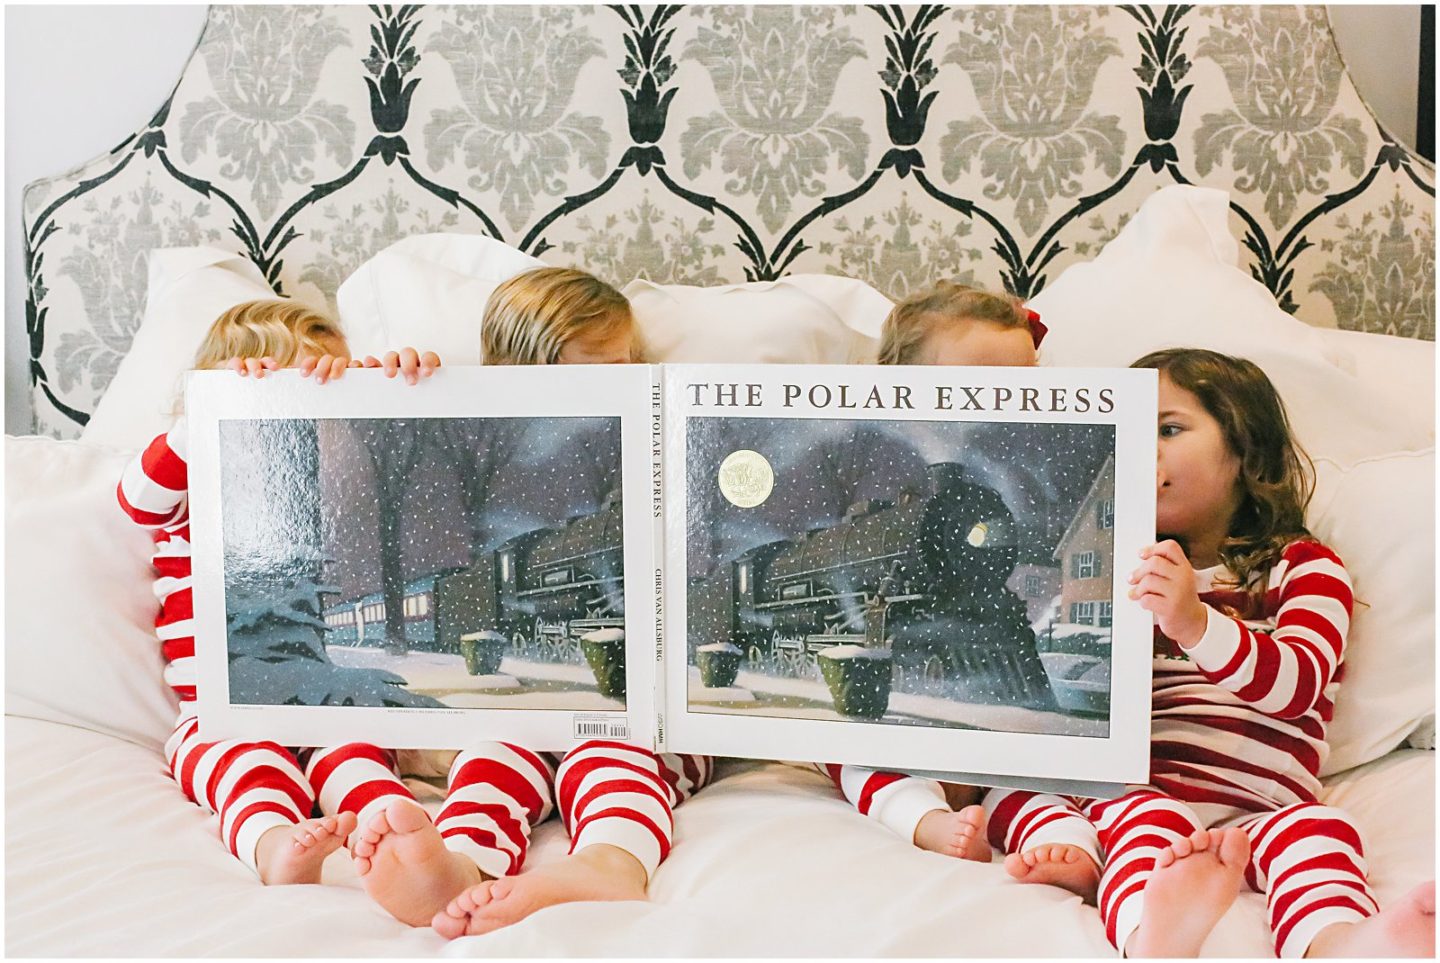 sibling children reading The Polar Express in matching christmas pajama outfits